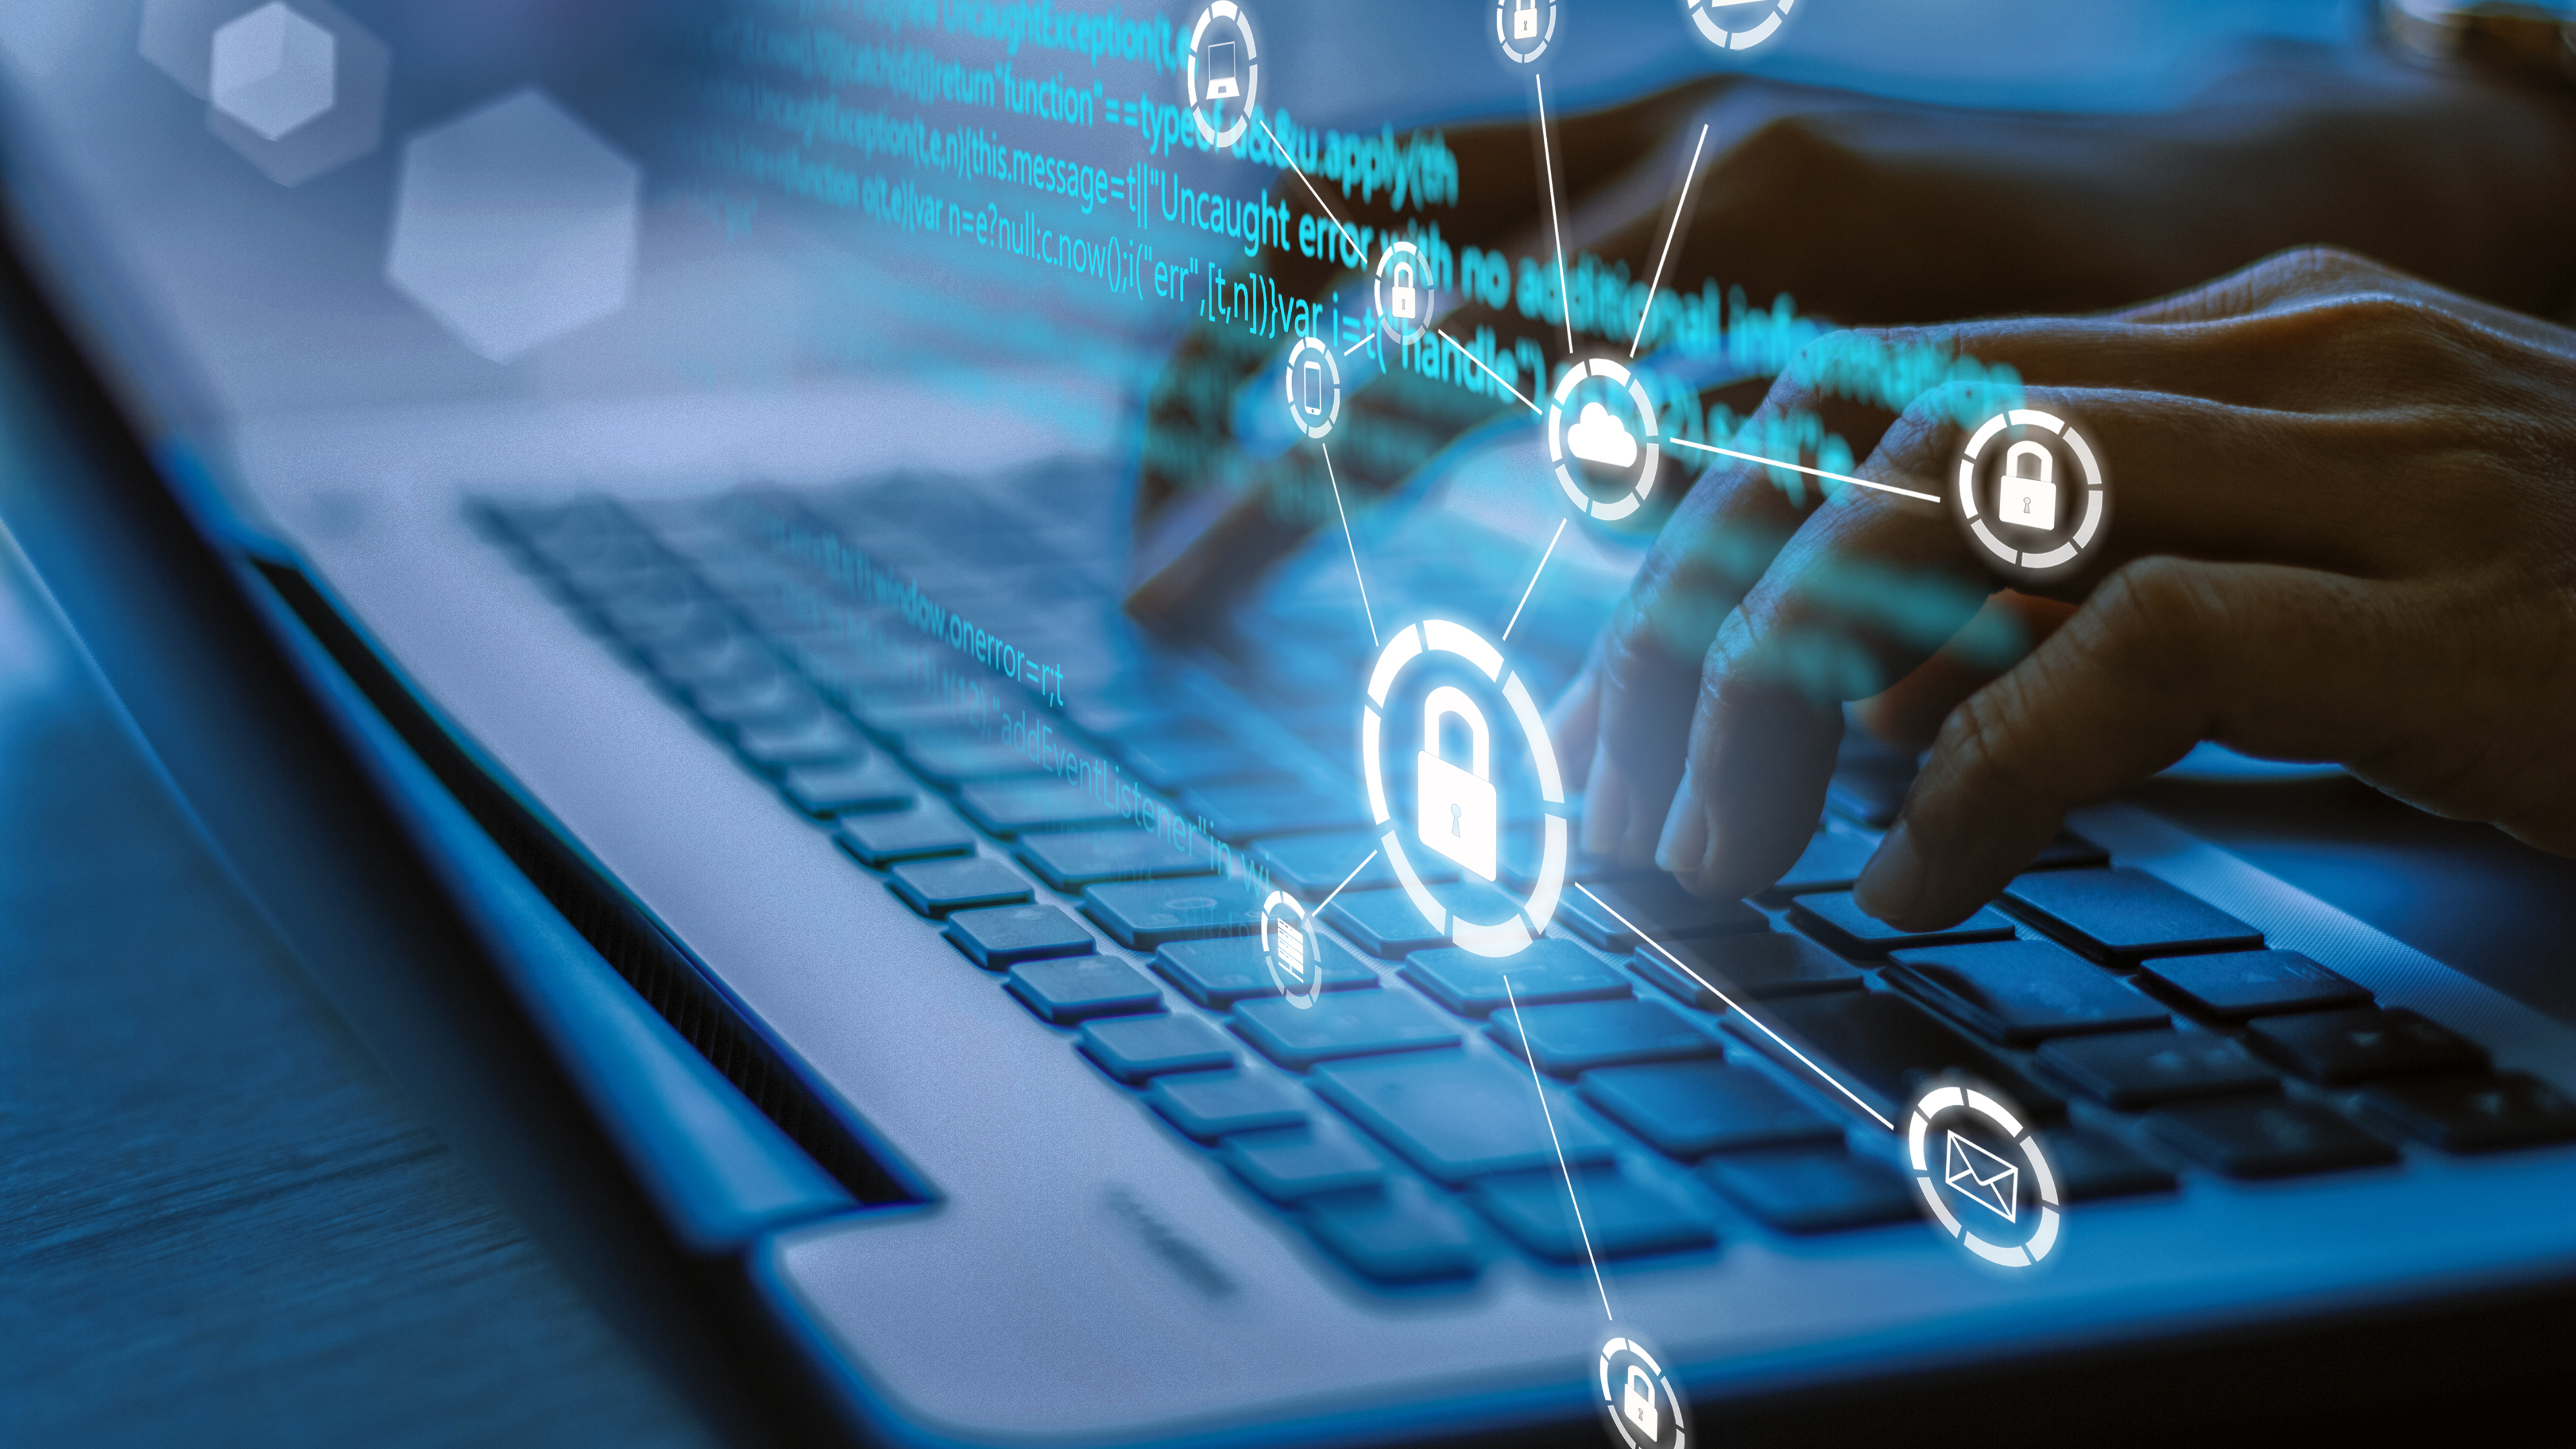 3 Benefits to Convey Digital Security Strengths to the Skeptical